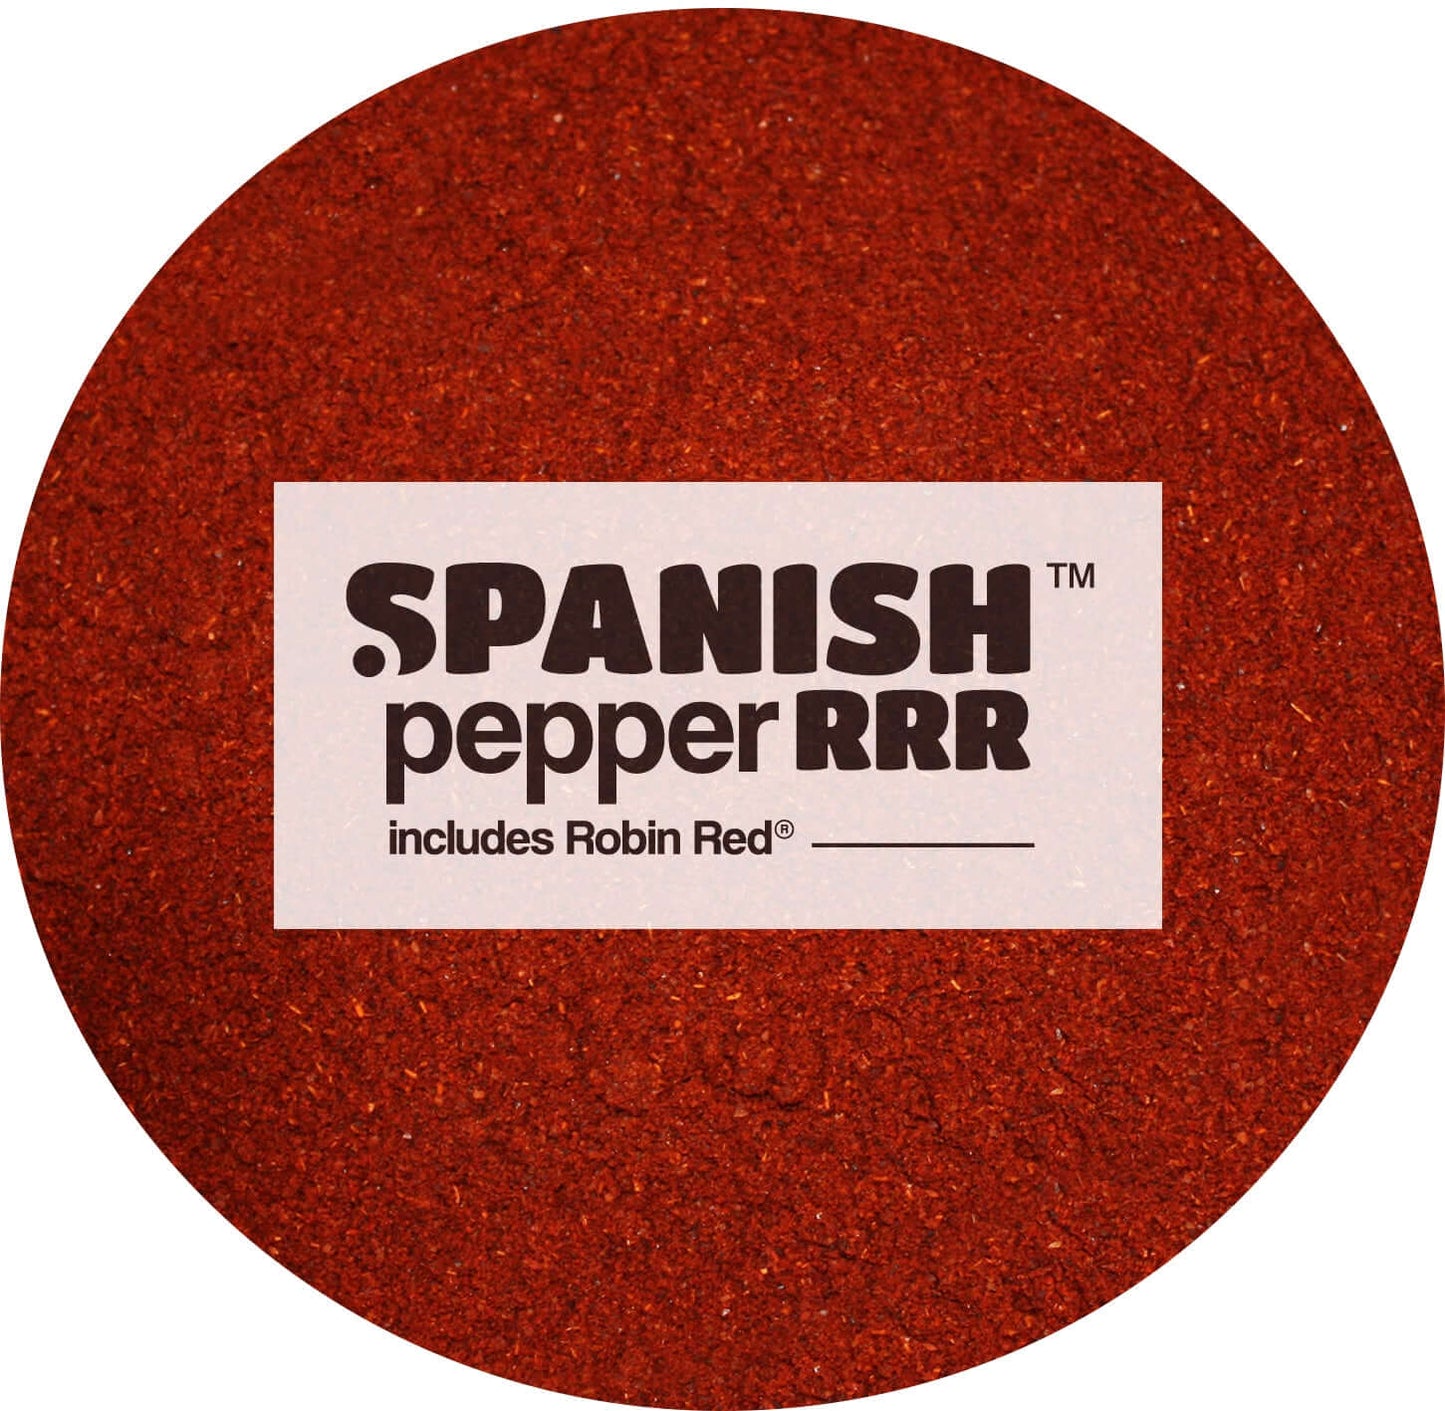 Haith's Spanish Pepper RRR™ for fishing - an orange mix with sweet peppers. 